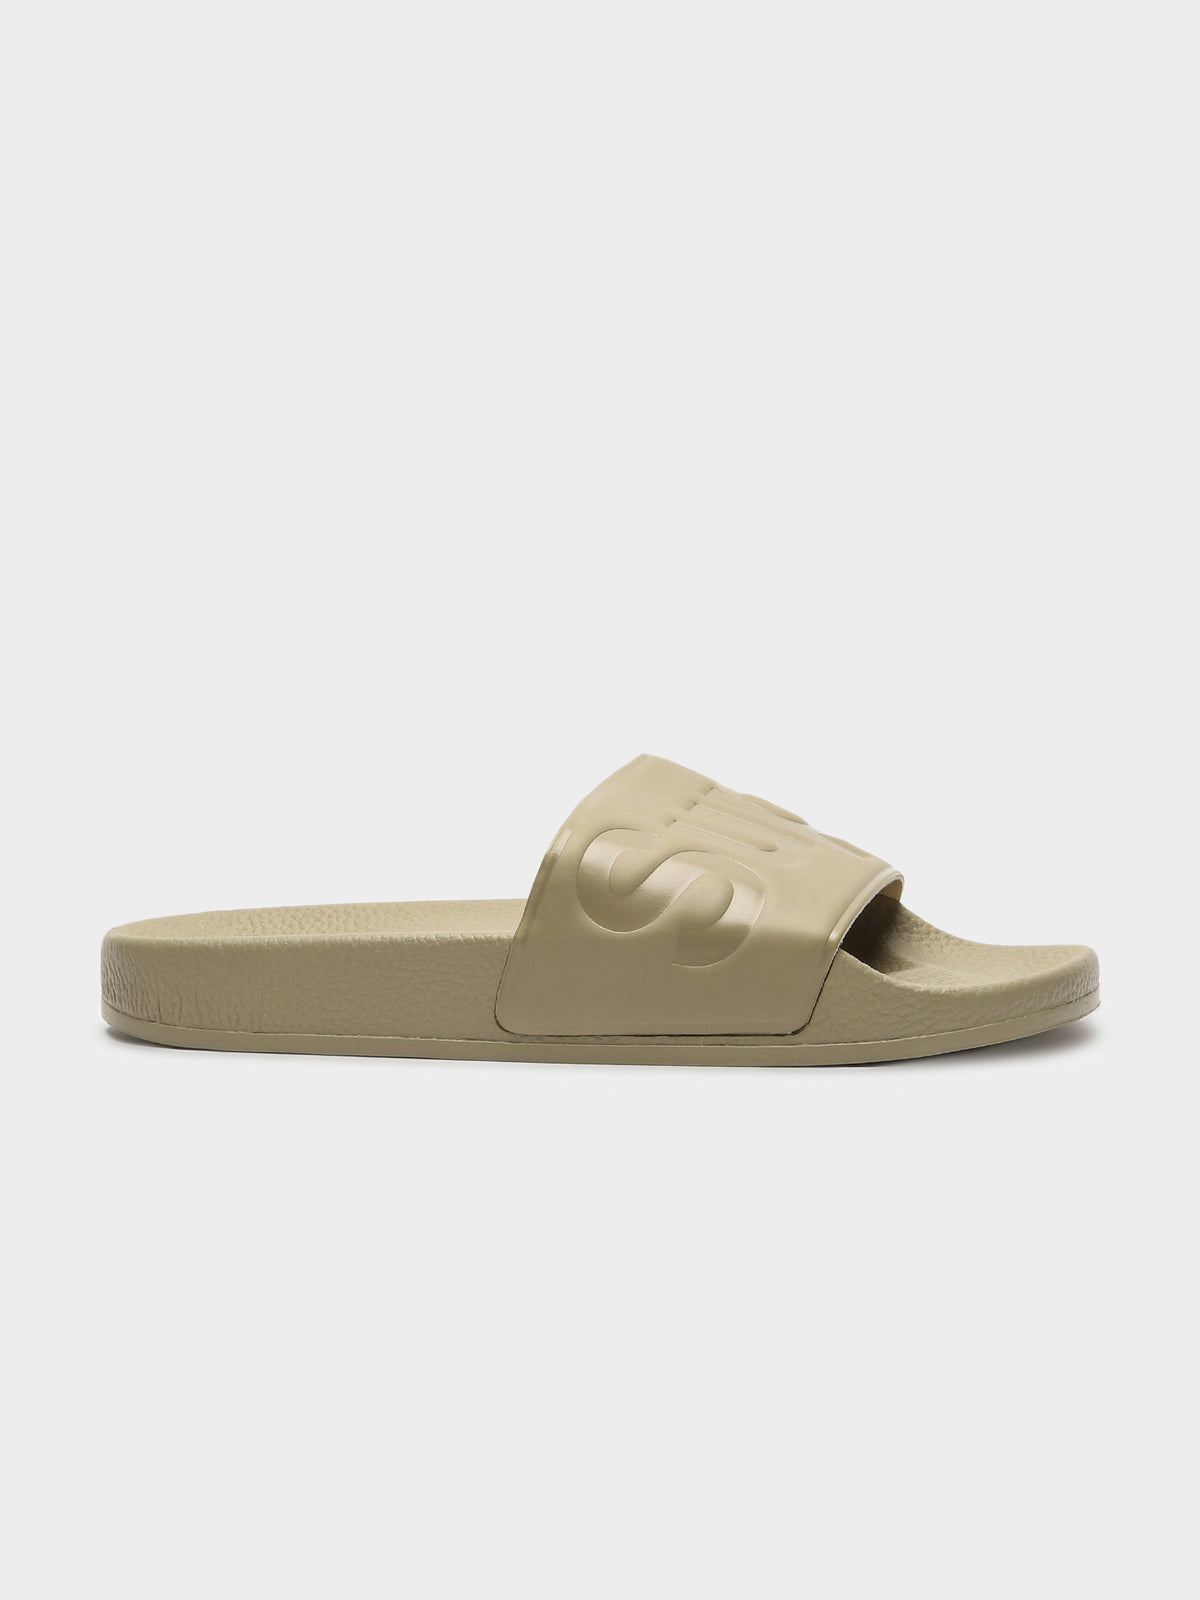 Unisex 1908 Logo Rubber Slides in Taupe